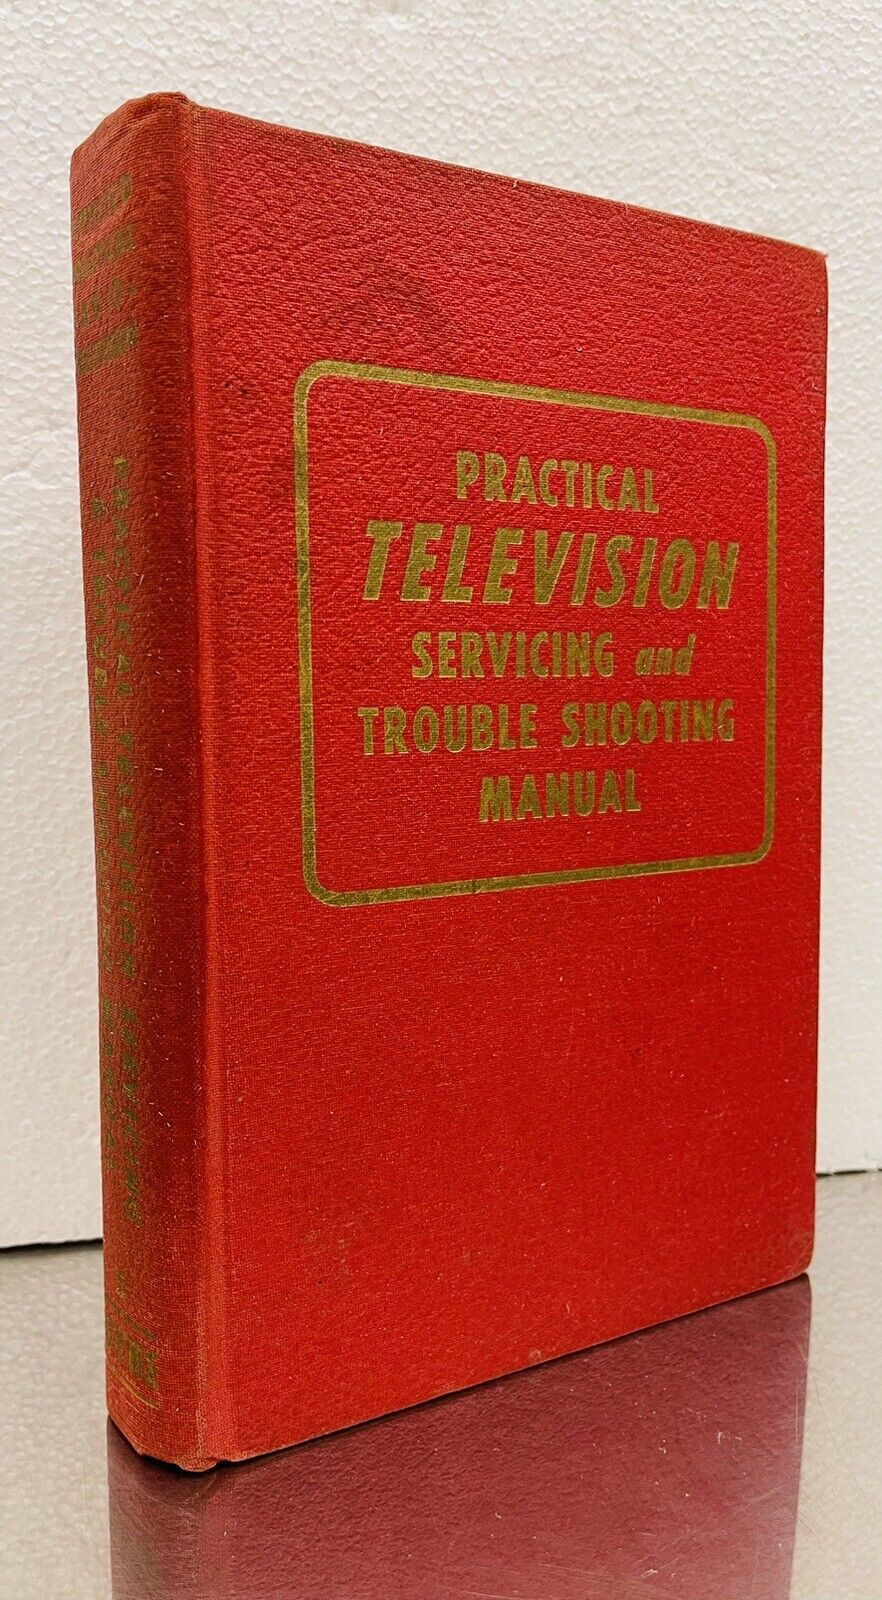 Practical Television Servicing and Trouble Shooting Manual Coyne Electrical 1950